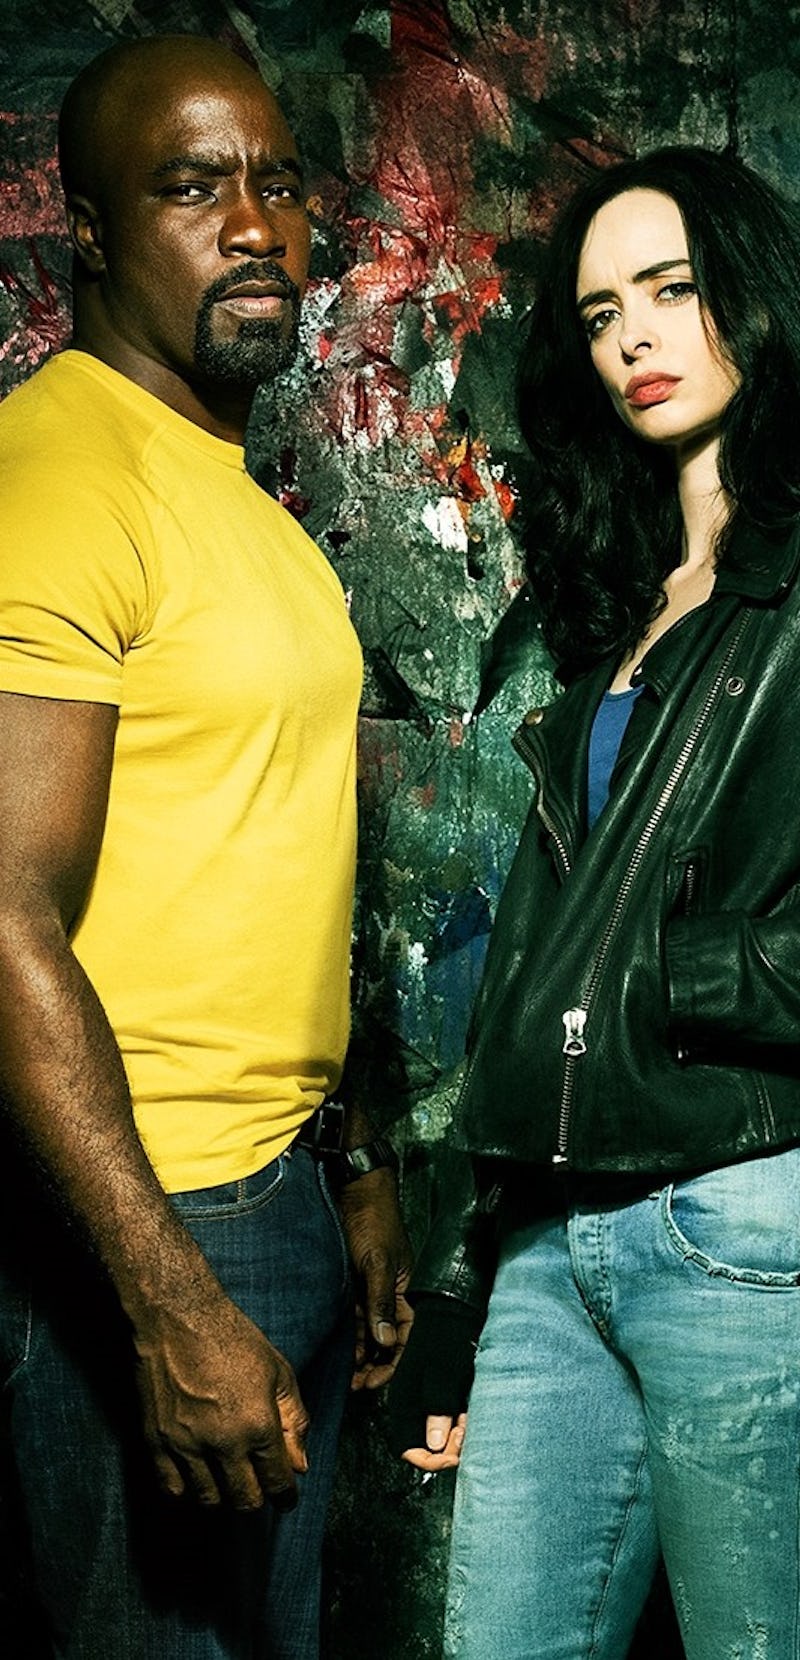 poster image from The Defenders Netflix series